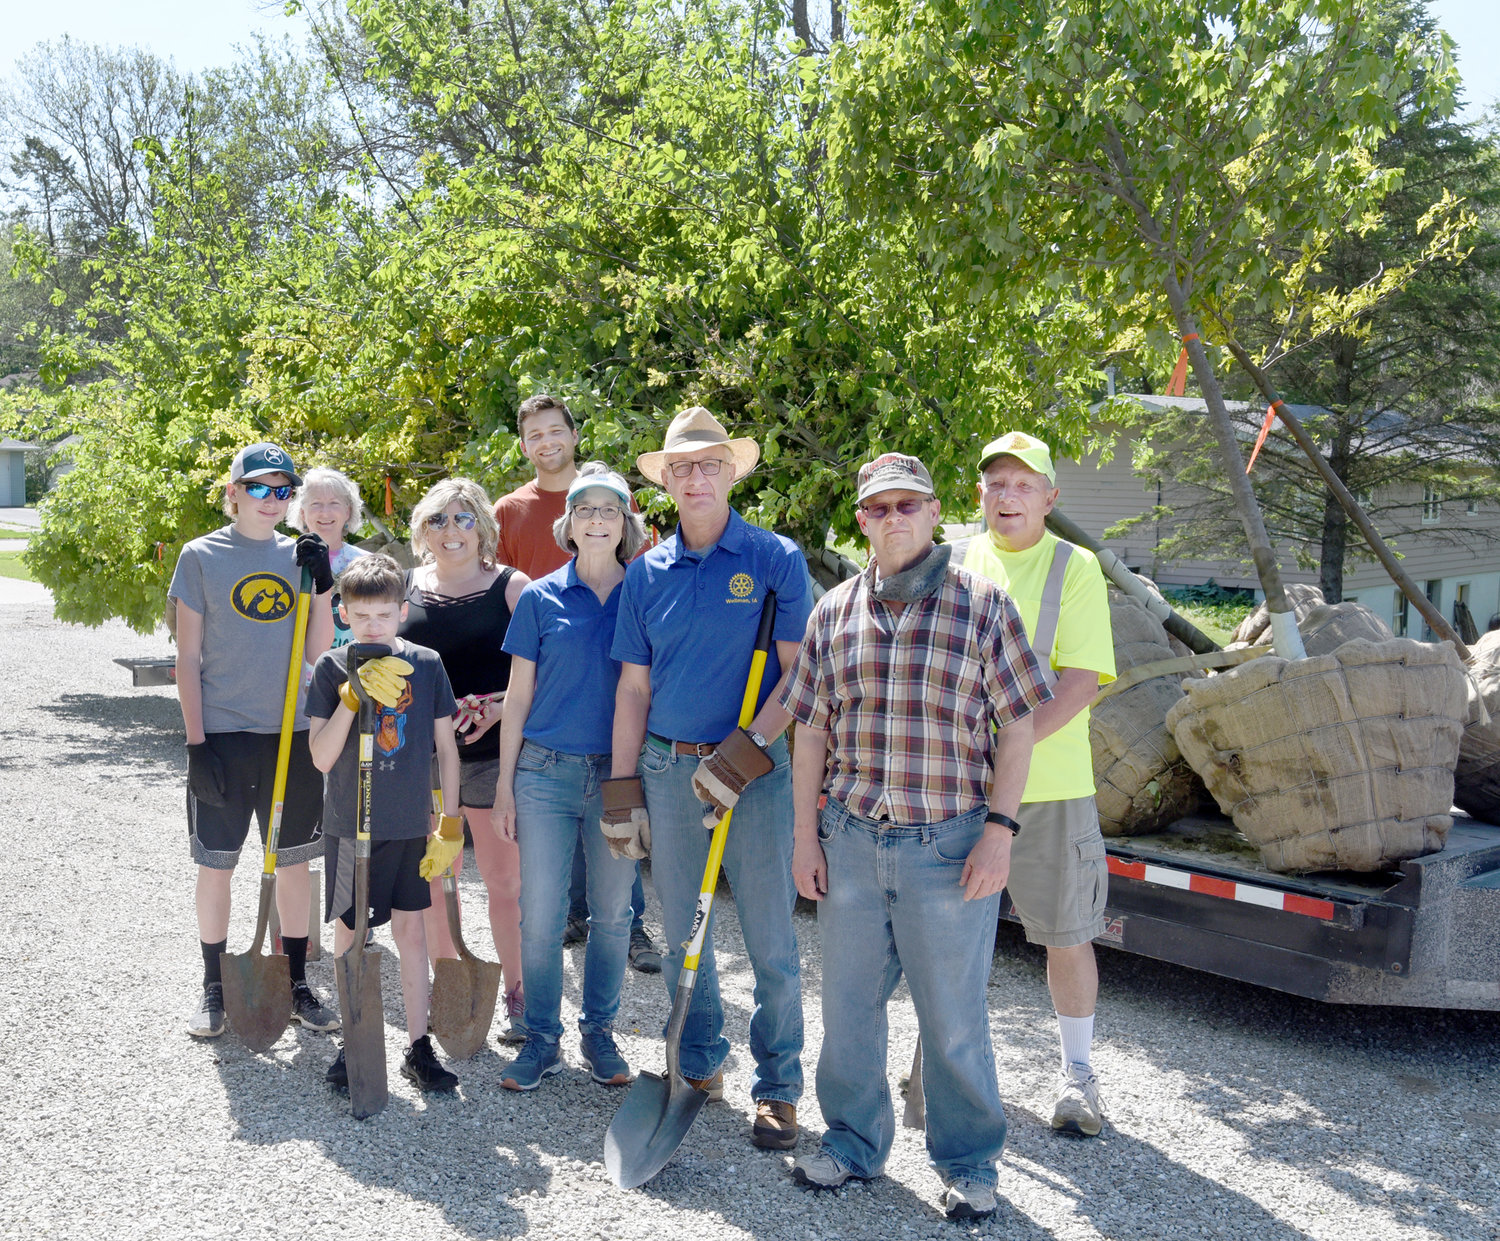 The May 26 tree-planting crew included, from left, Kelyn Yoder, Marianne Reha-Van Roekel, Jason Yoder, Jessica Hochstedler Yoder, Jonah Van Roekel, Merridy and Allen Leichty, Tom Buckwalter and Leroy Powell.